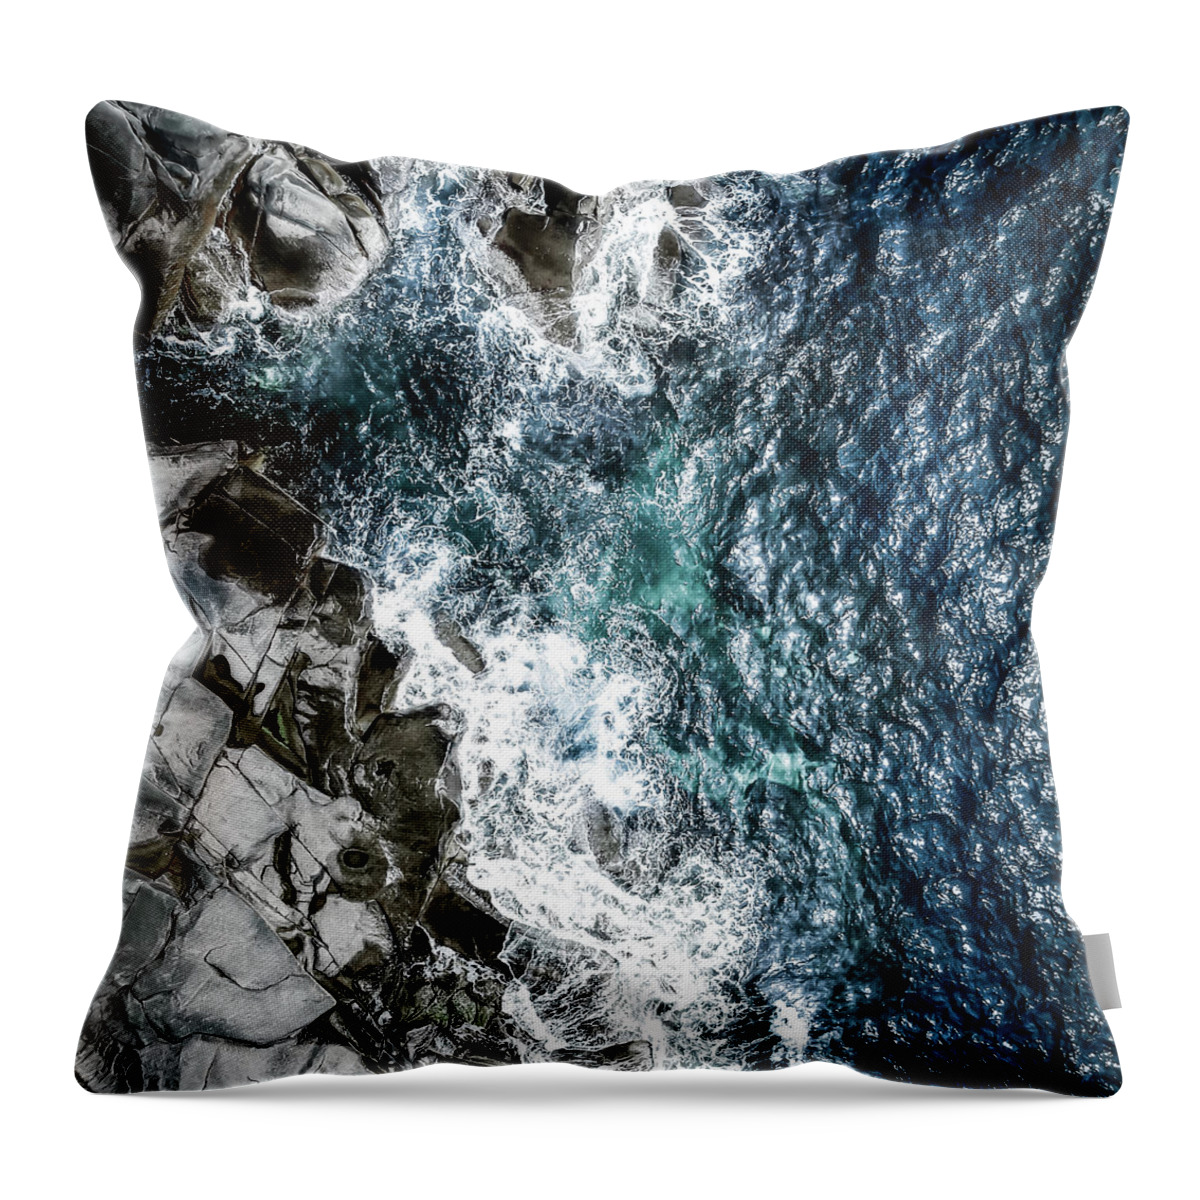 Drone Throw Pillow featuring the photograph Skagerrak Coastline - Aerial Photography by Nicklas Gustafsson